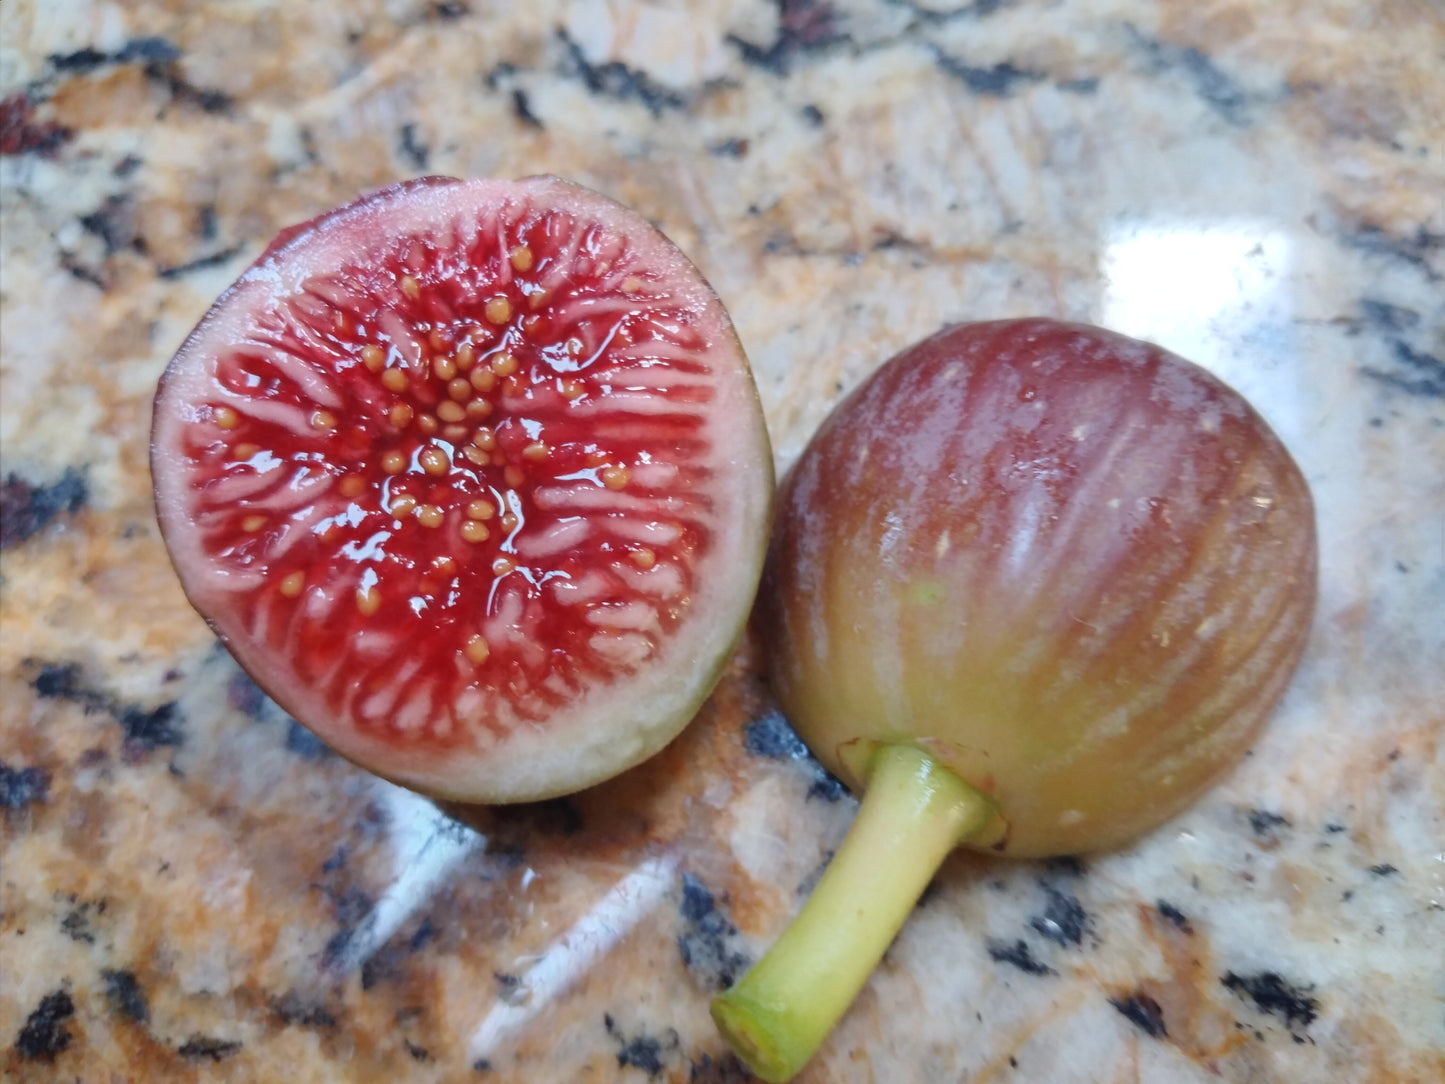 Exotica Strawberry Jam Fig - 2 Cuttings - Tasty Figs - Easy to Root